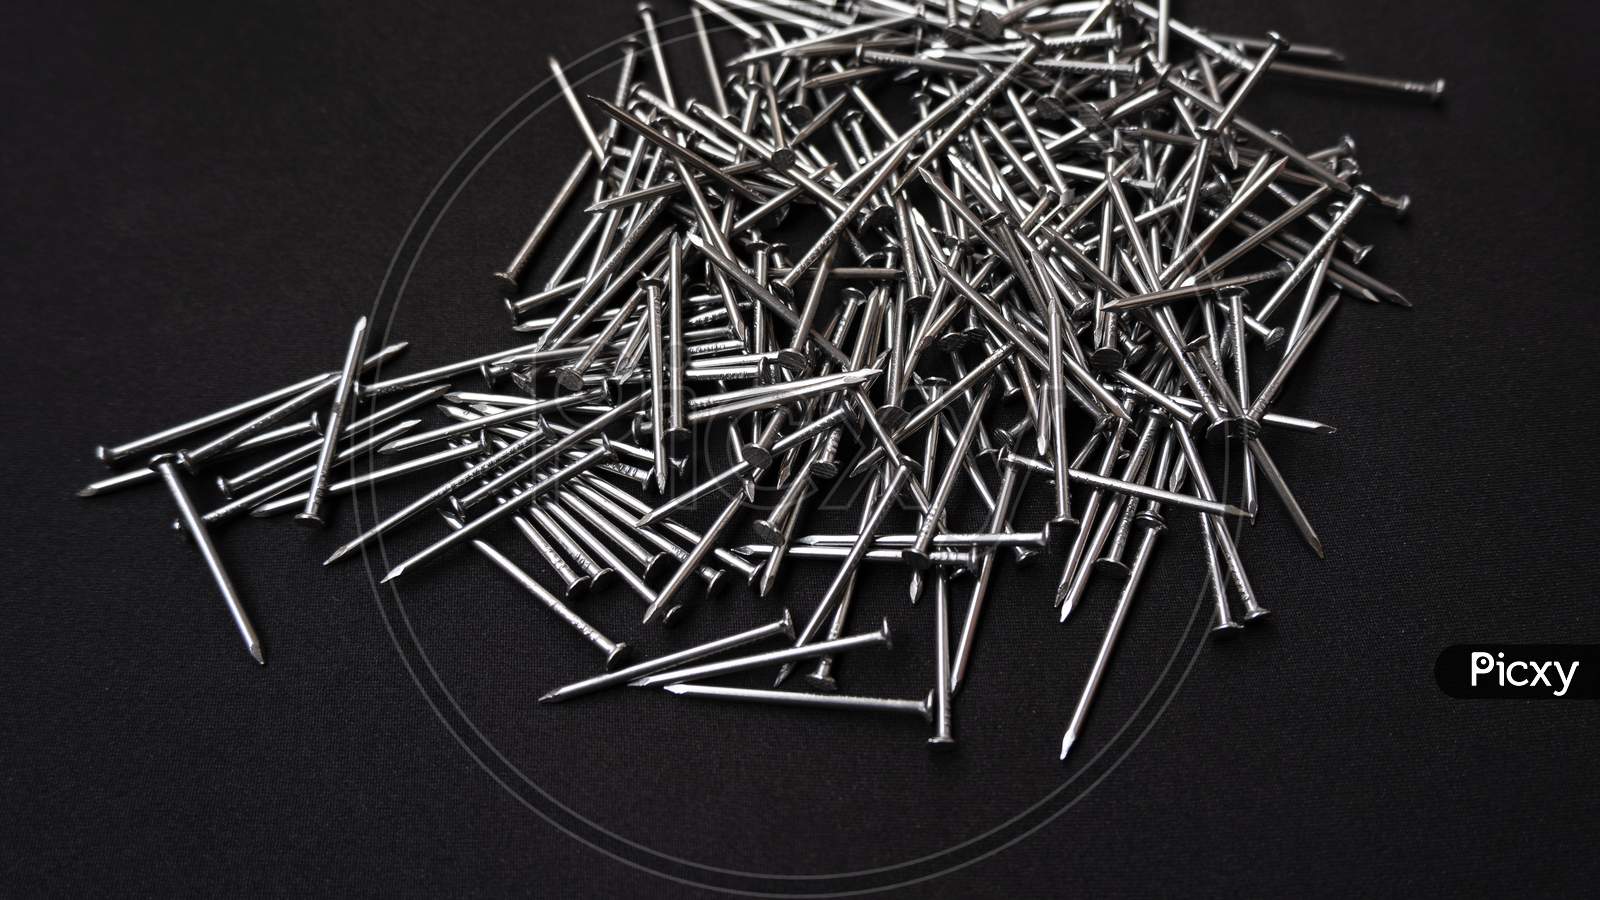 Panoramic Shot Of A Pile Of Steel Nails On A Black Background